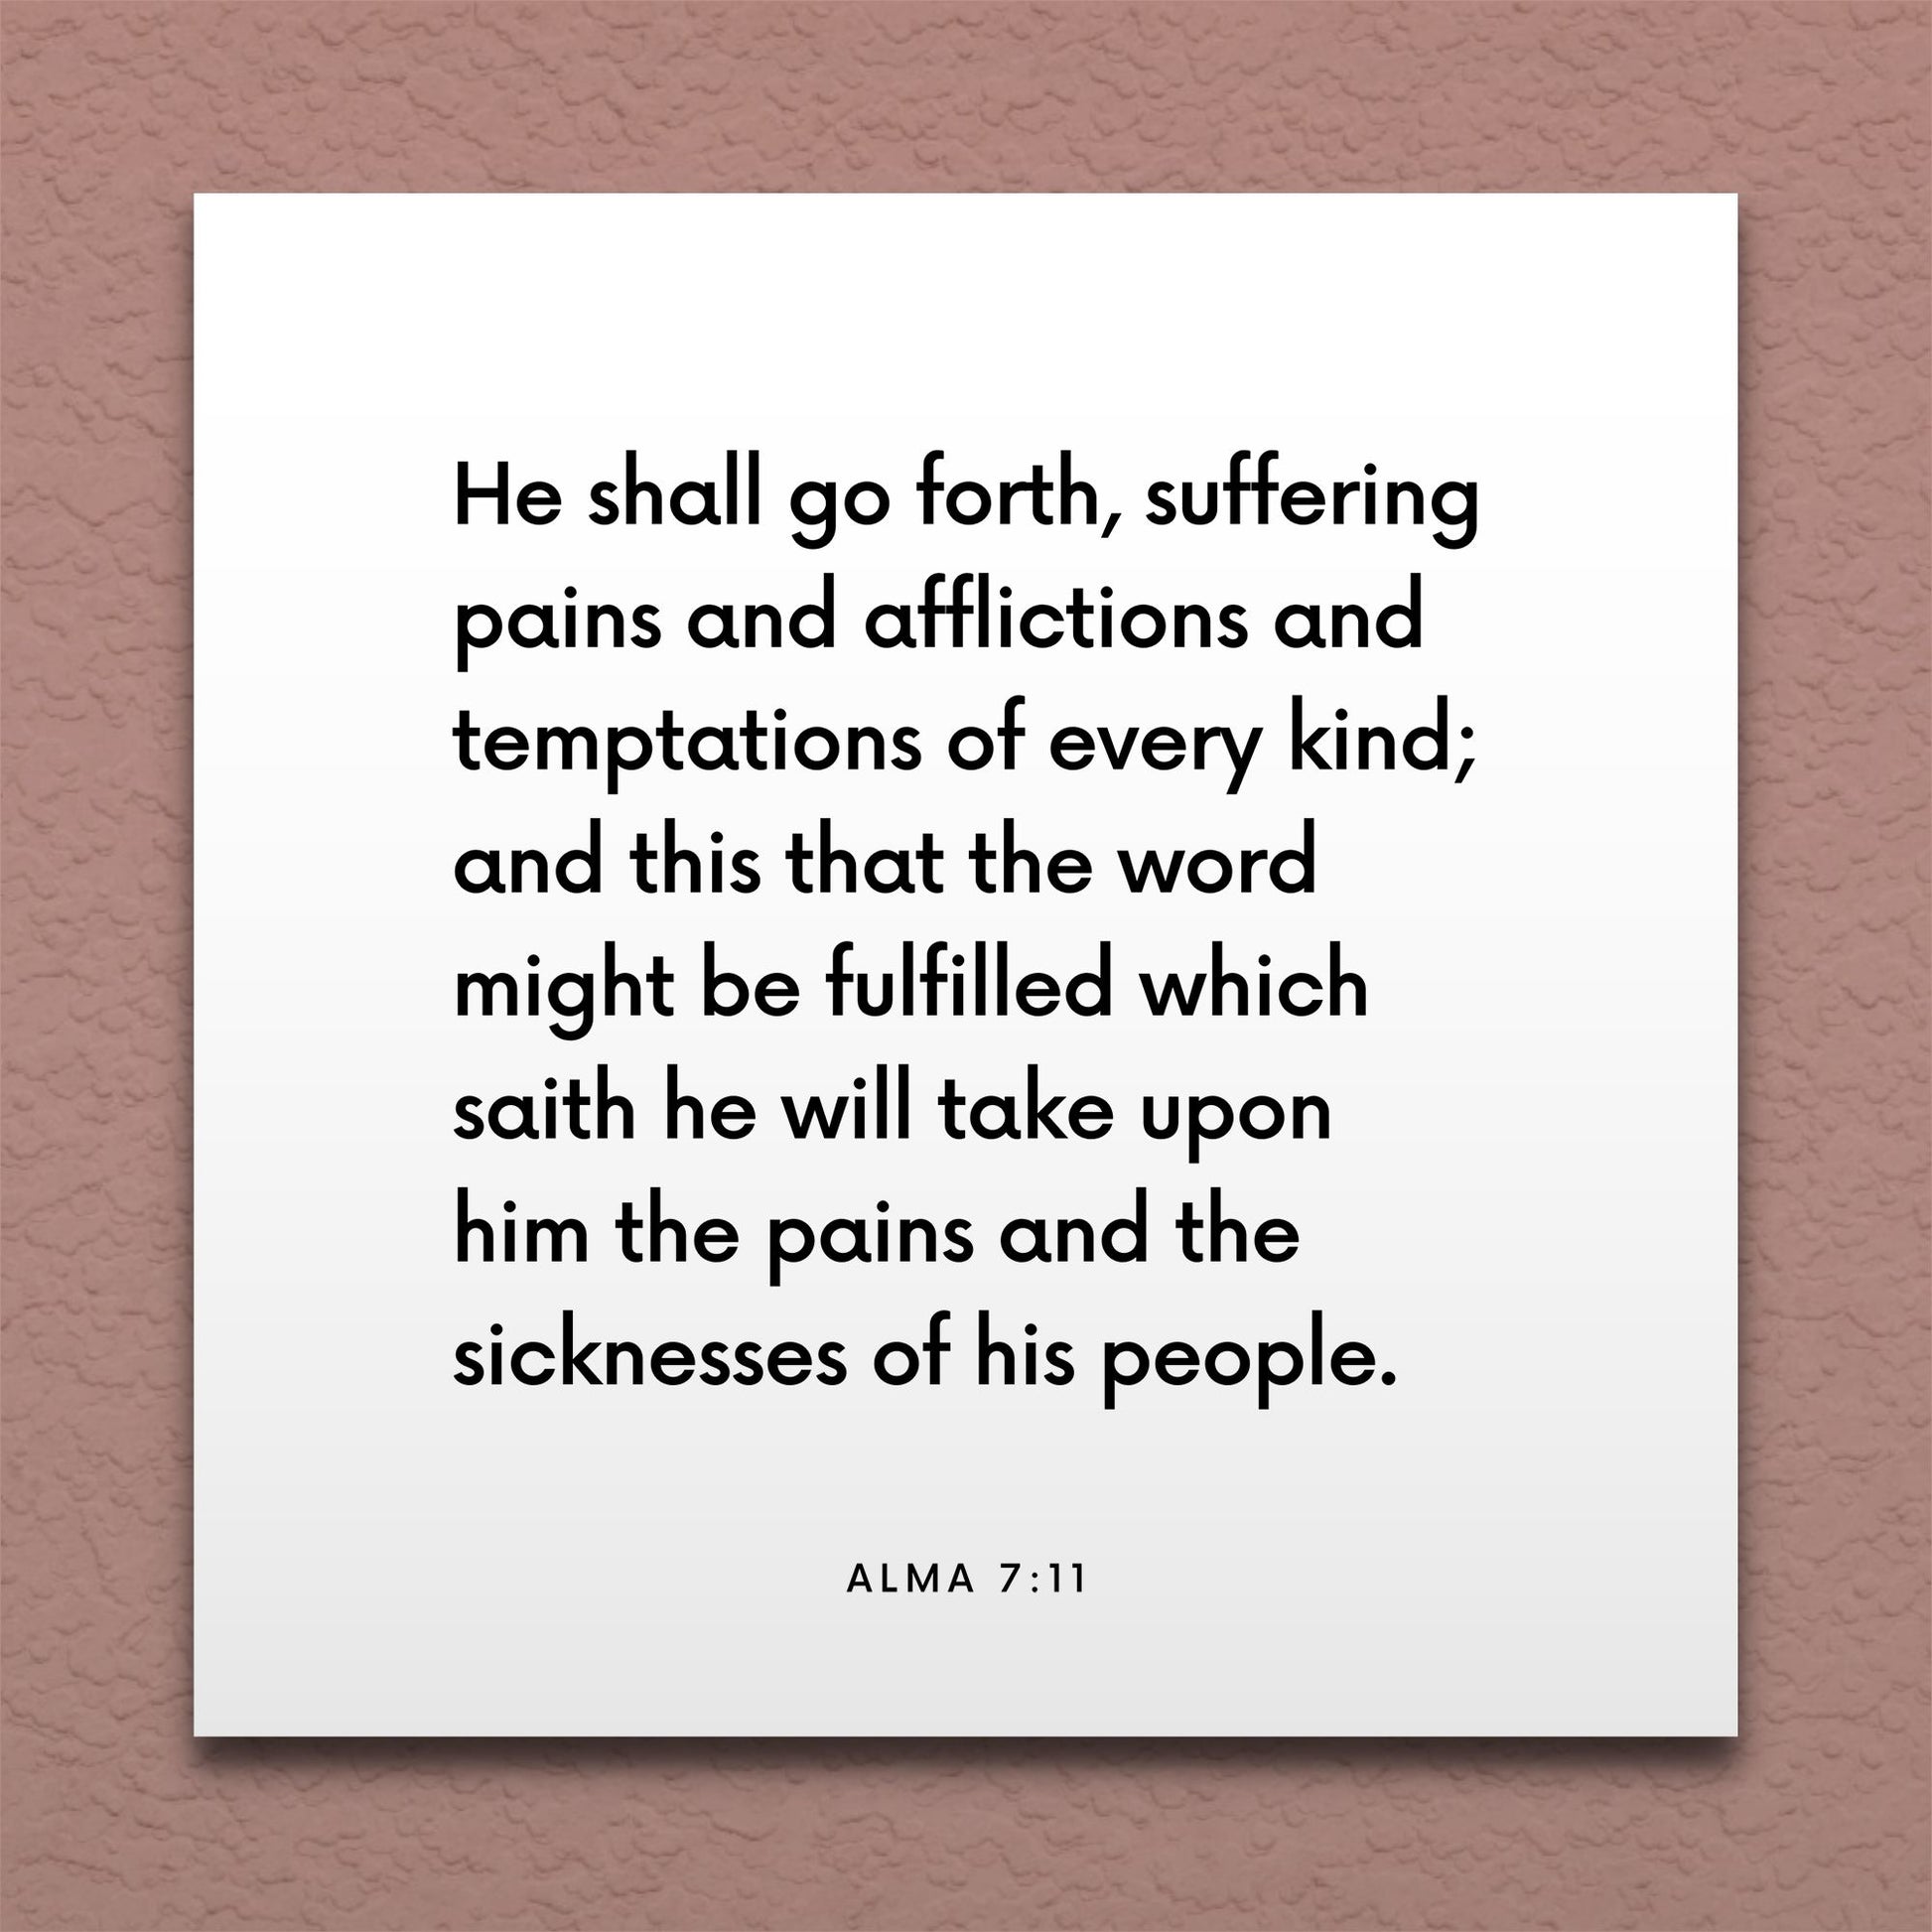 Wall-mounted scripture tile for Alma 7:11 - "He will take upon him the pains and sicknesses of his people"